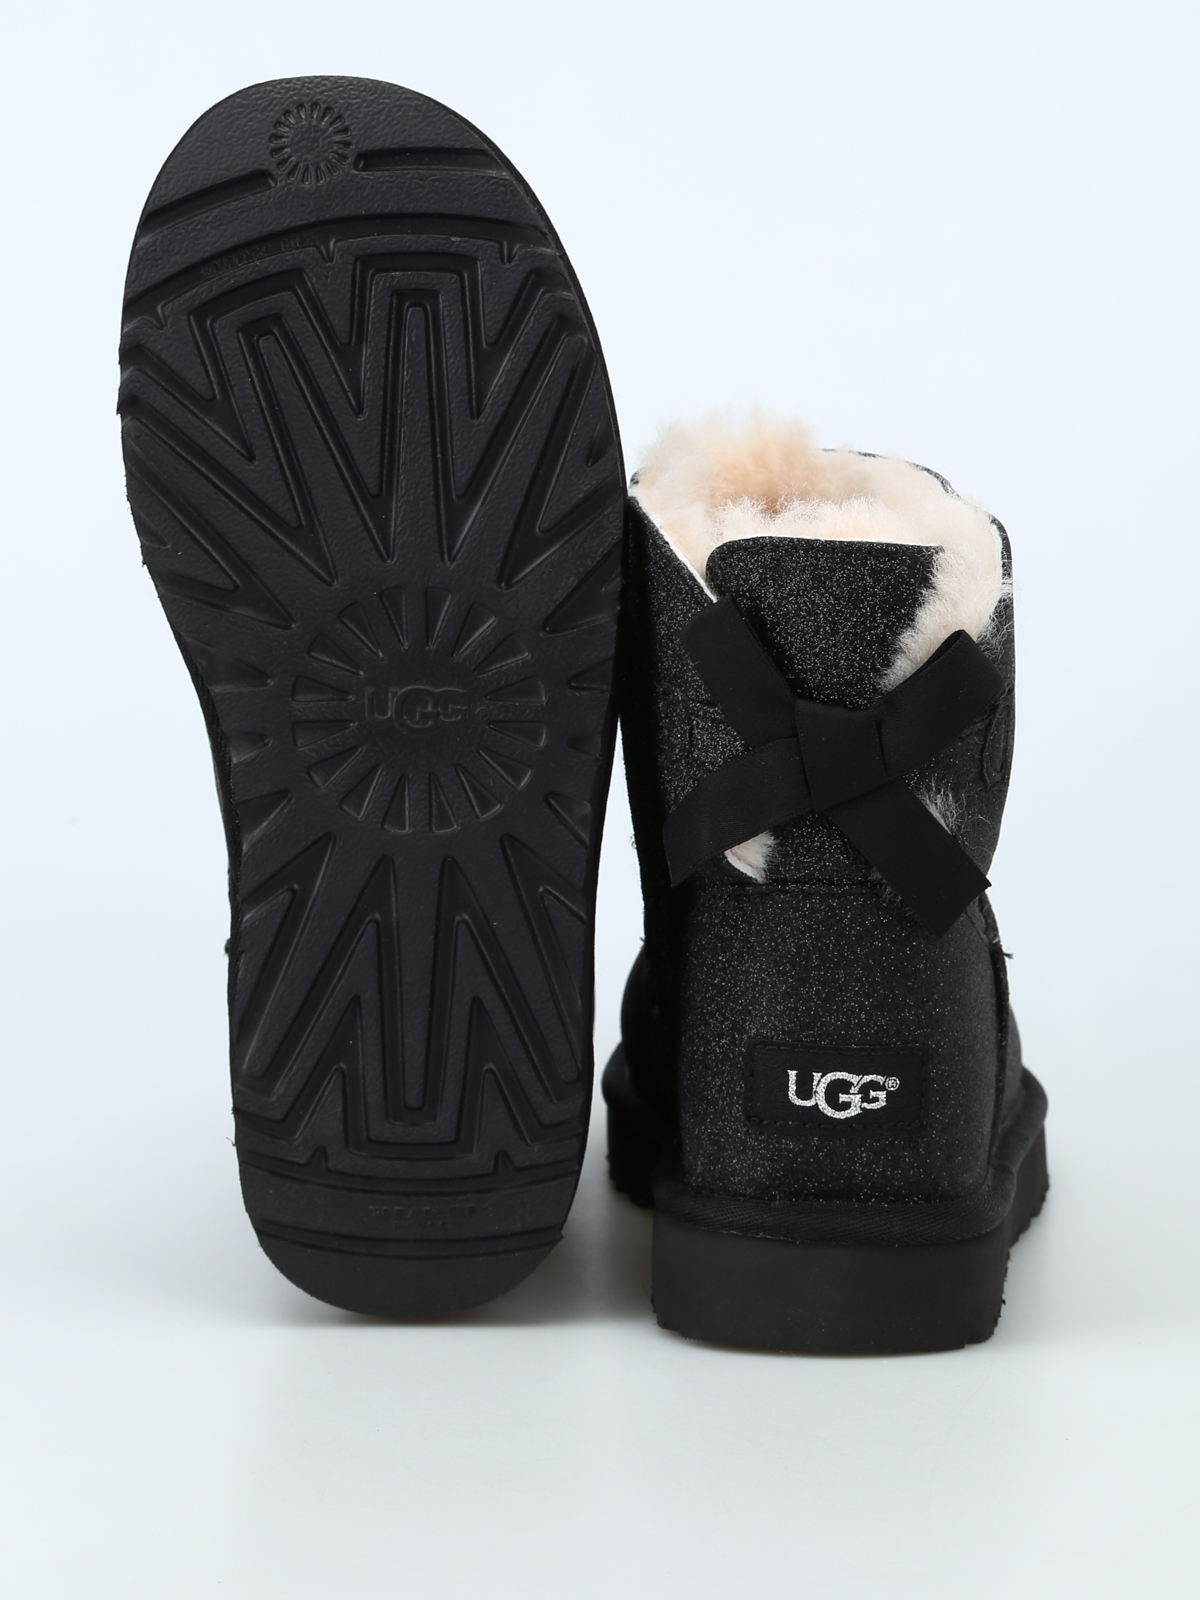 glitter uggs with bow